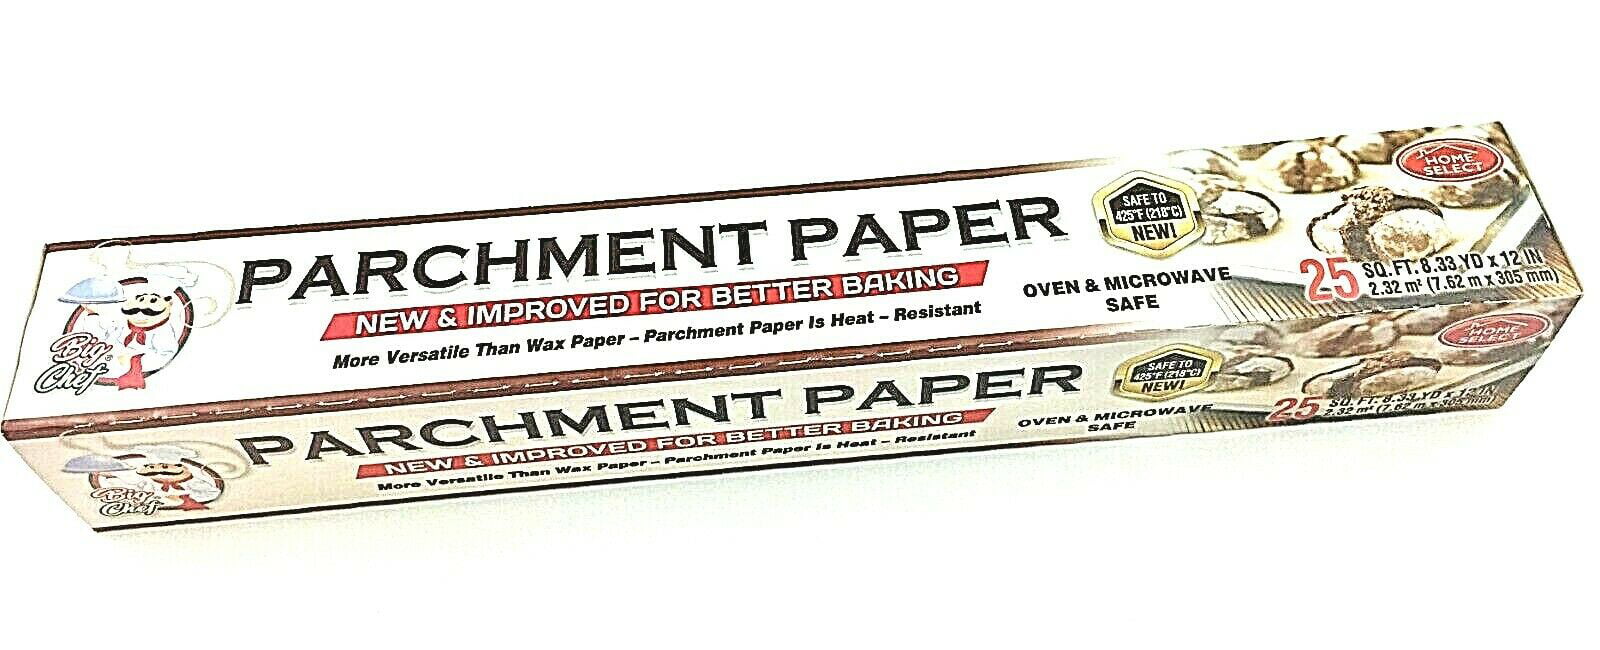 Parchment Paper Improve For Better Baking 25 SQ.FT Oven Microwave Safe 2Pack 